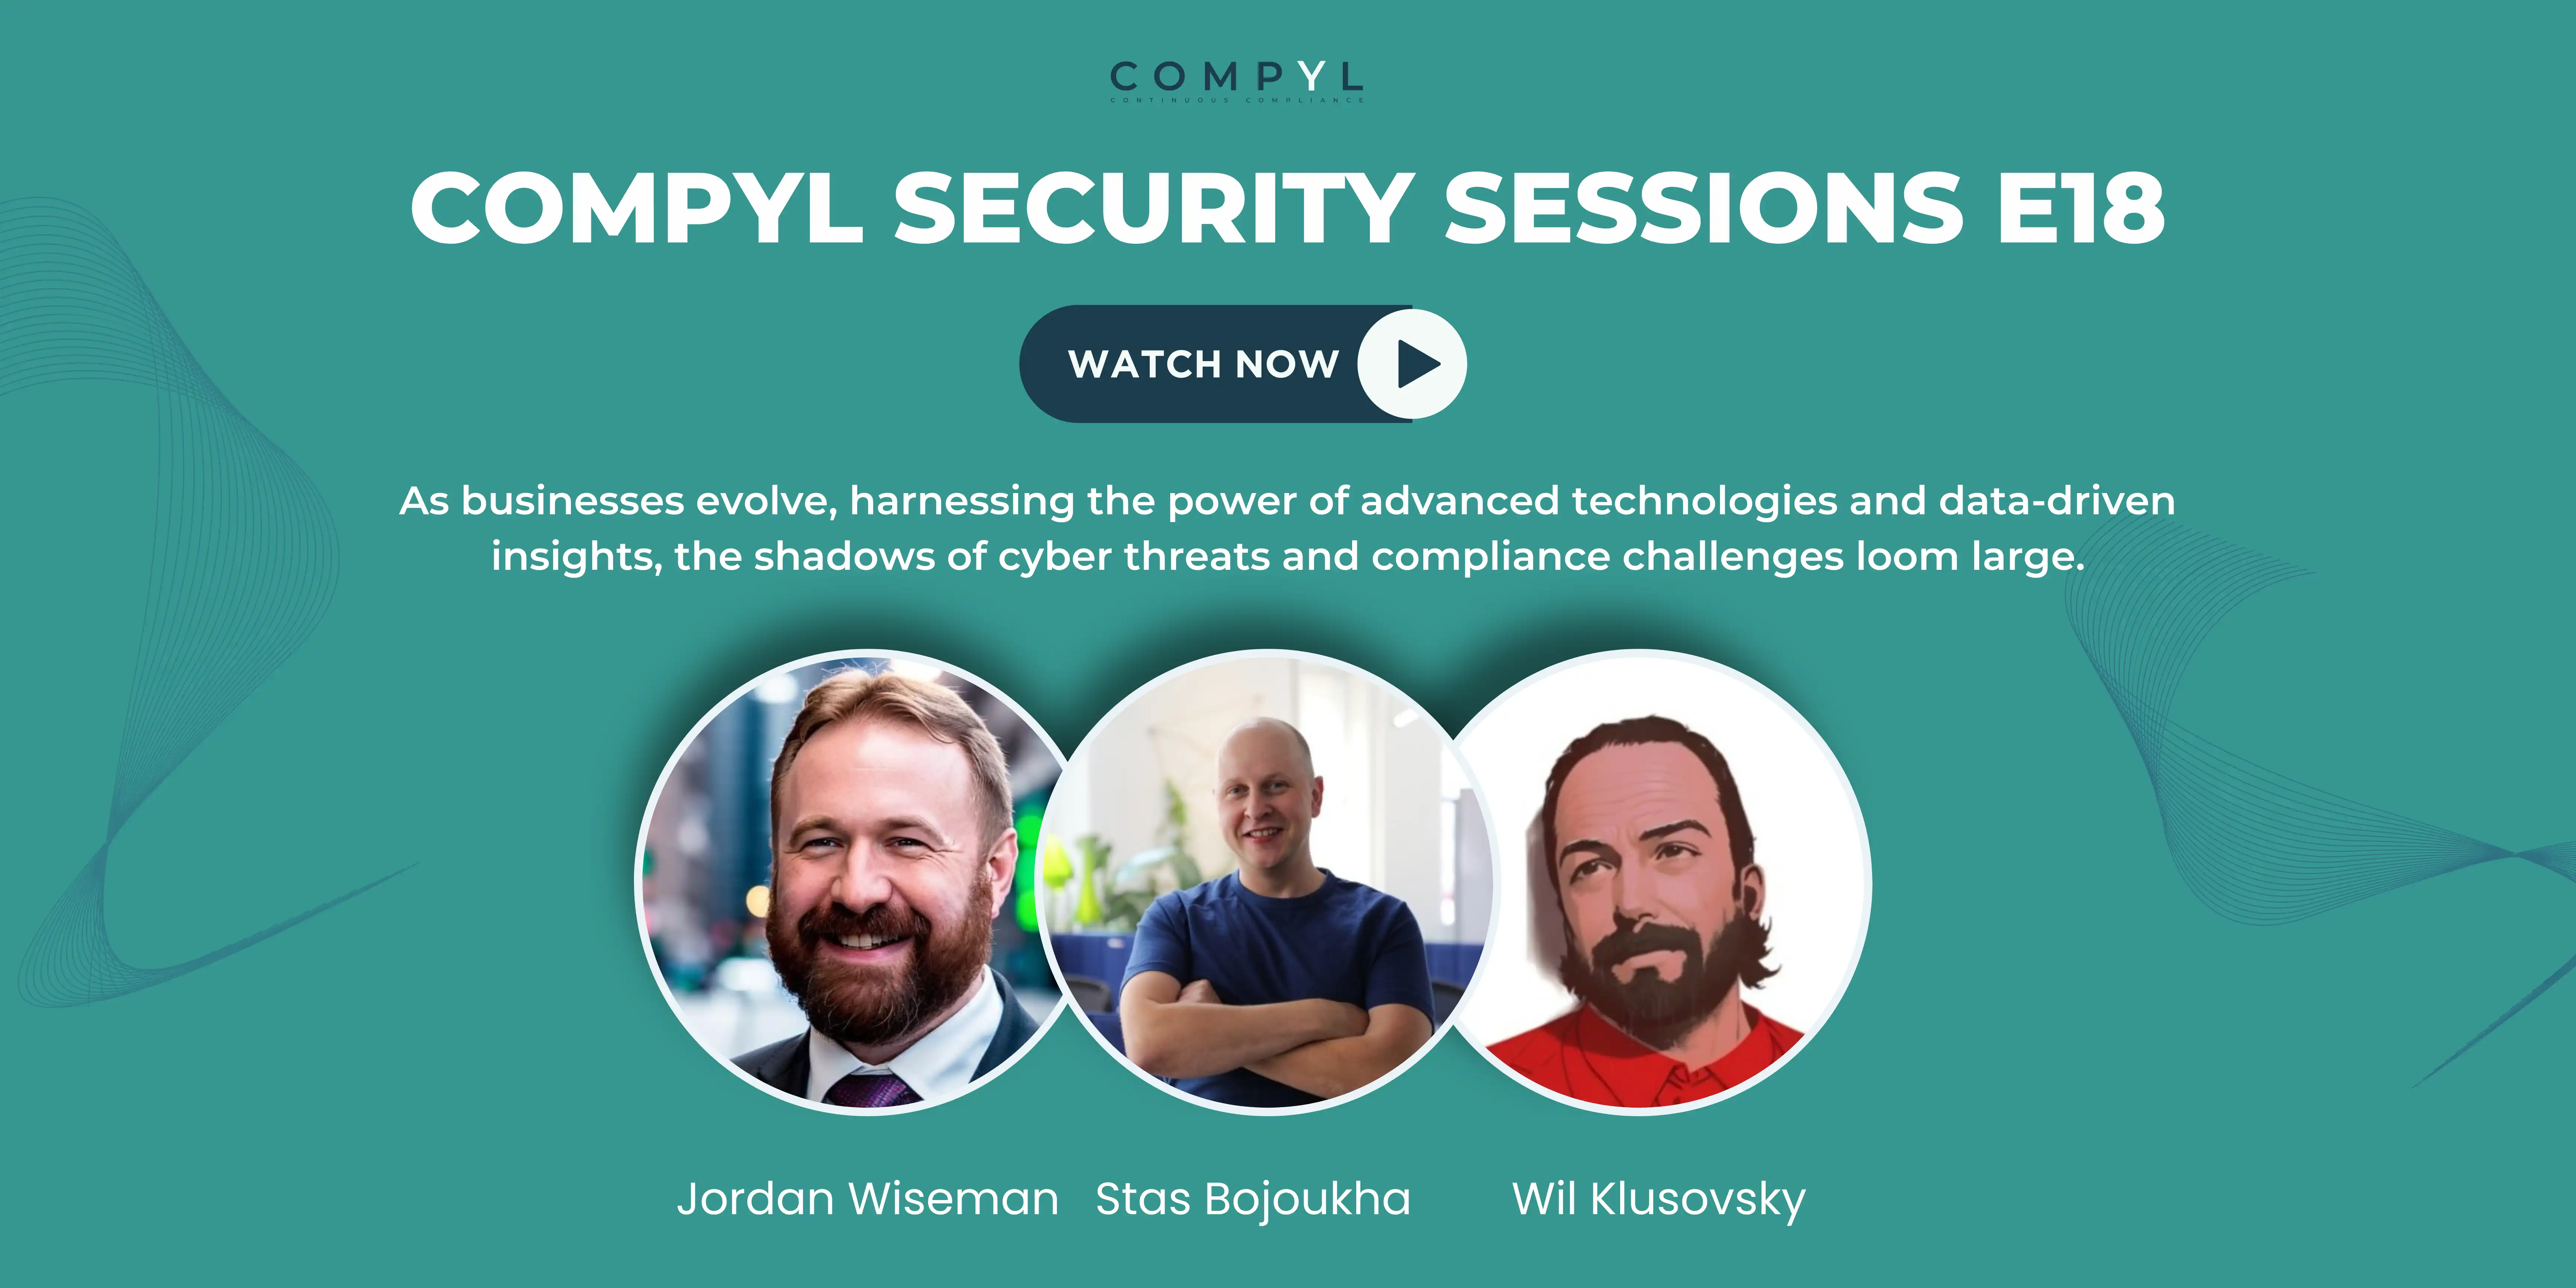 Compyl Security Sessions E18